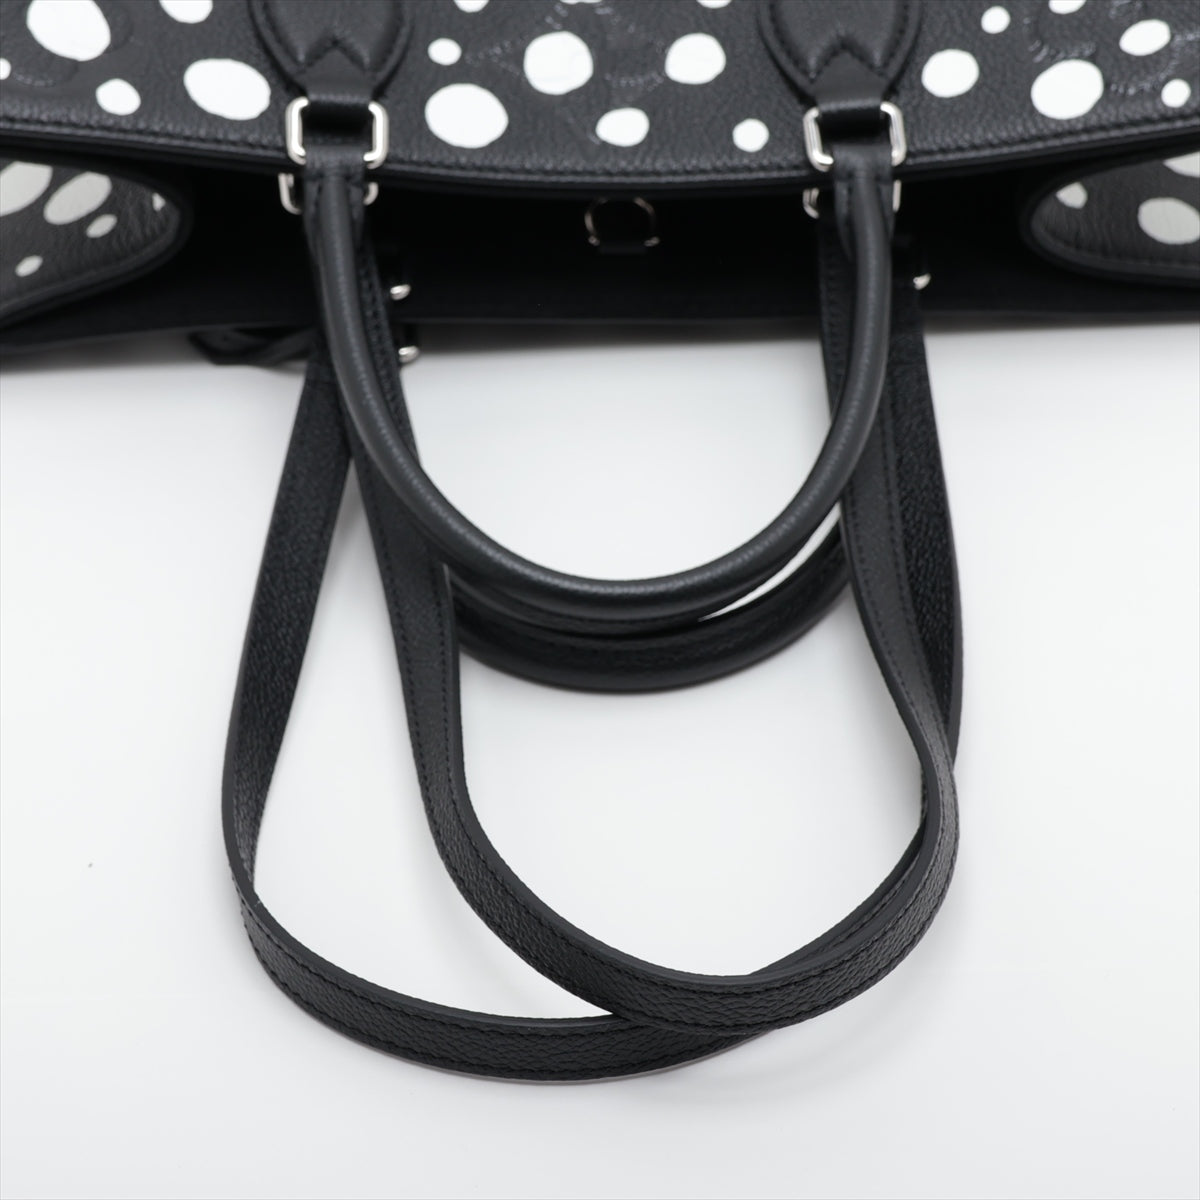 Louis Vuitton x Yayoi Kusama On the Go MM M46389 Tote bag Black There was an RFID response